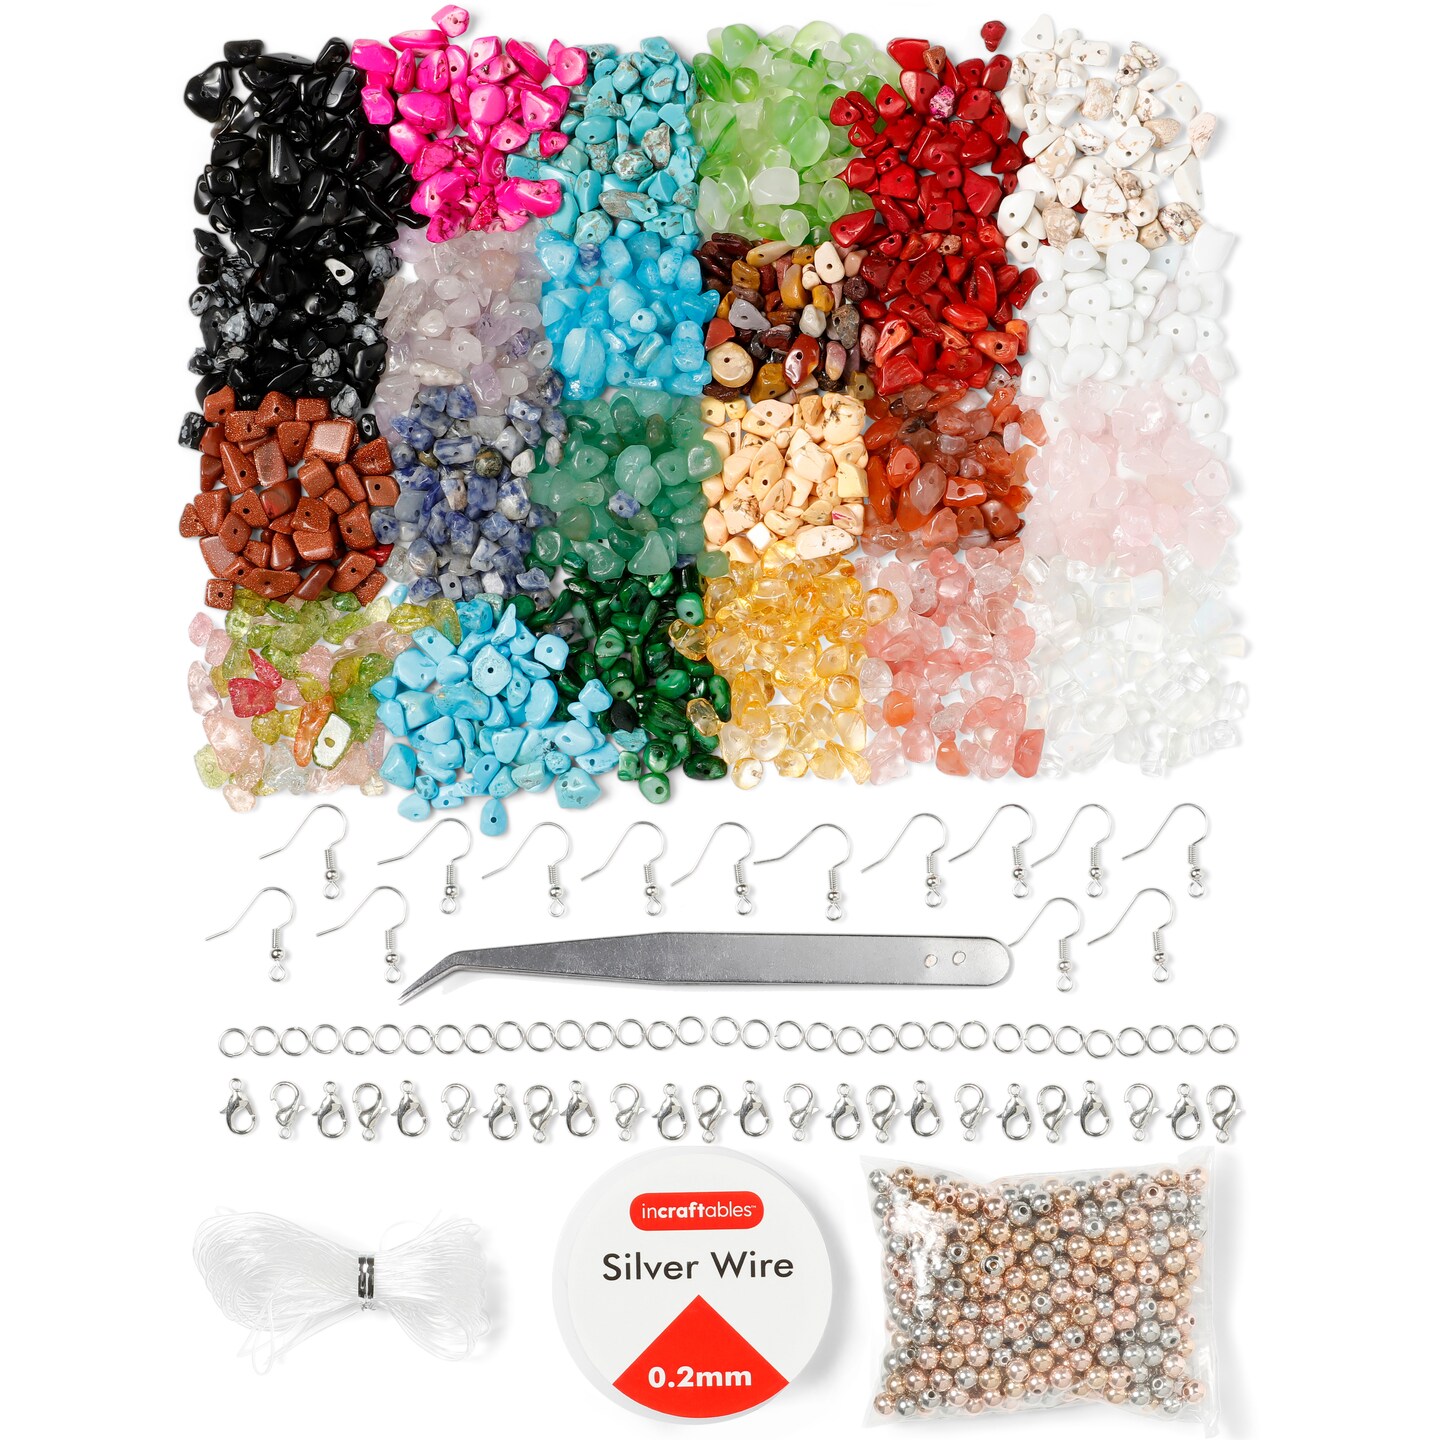 Gold Plastic Spacer Bead Mix by Bead Landing™